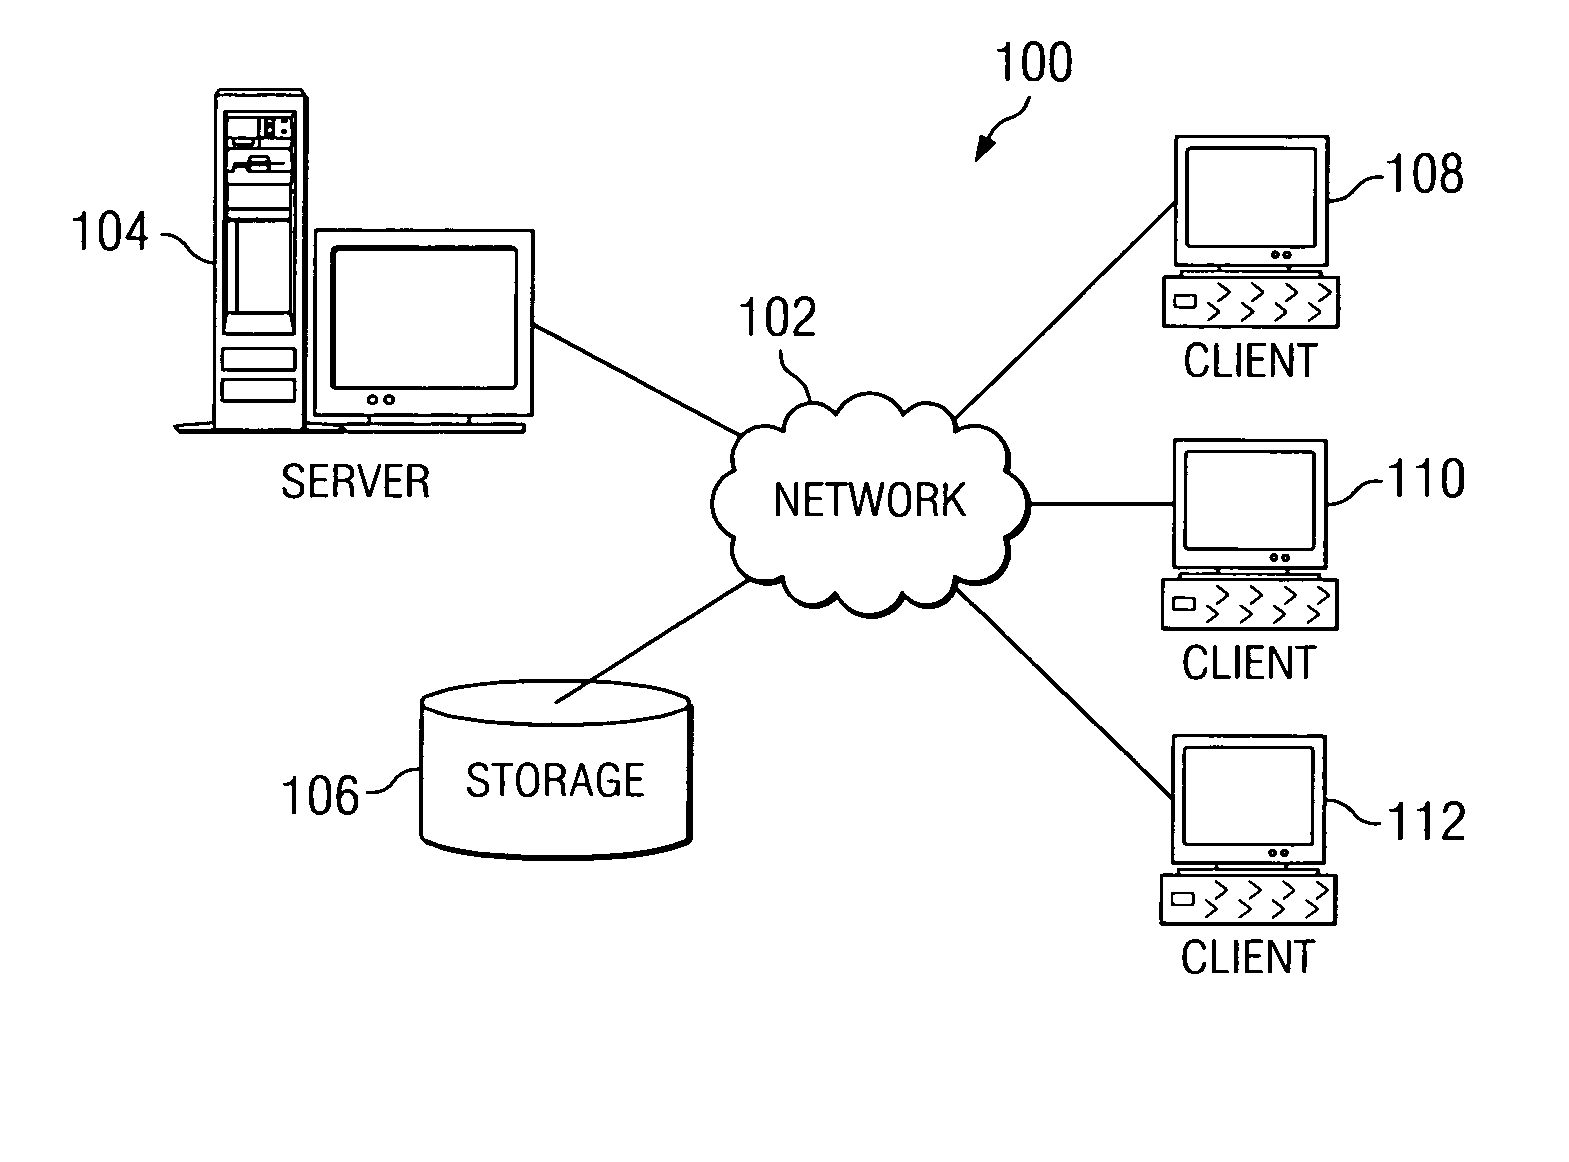 System and method for updating end user error reports using programmer defect logs